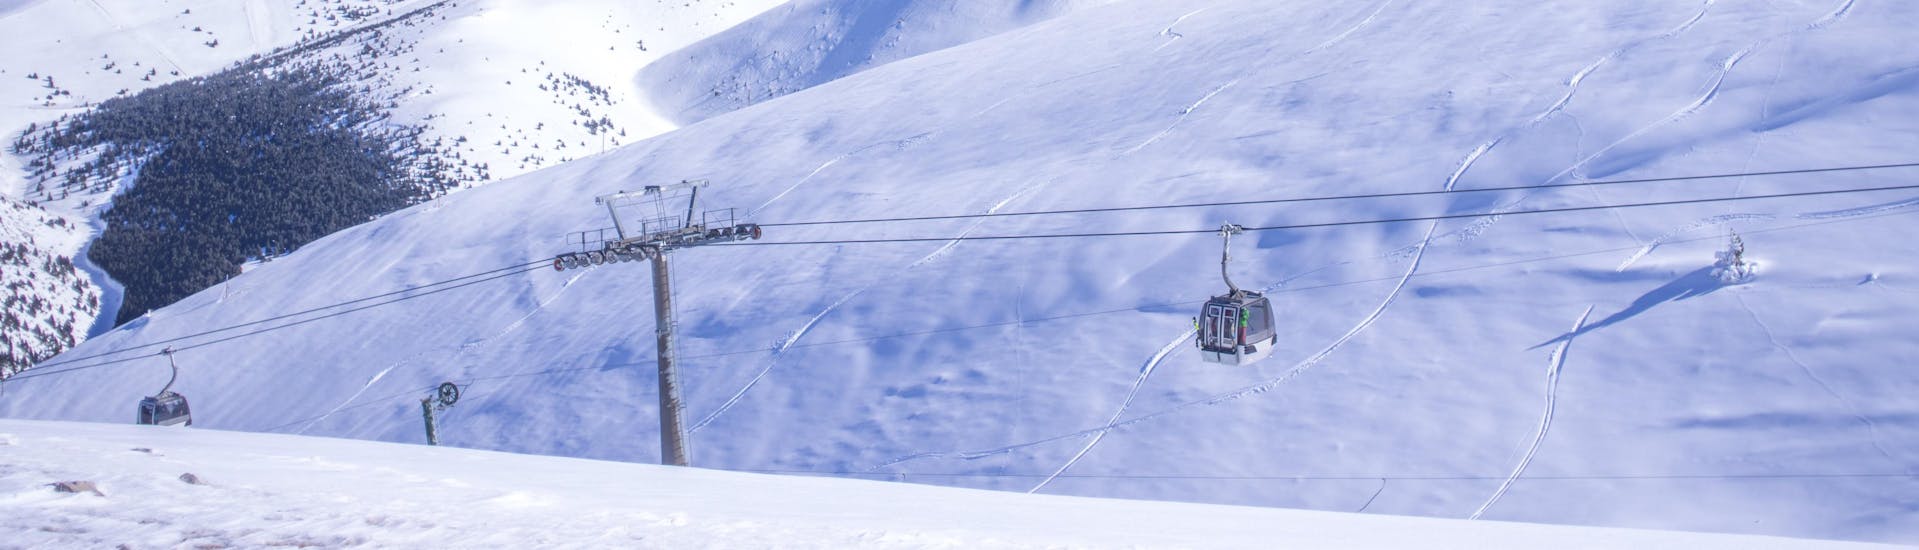 An image of a gondola carrying skiers up to the top of the mountain in the Catalonian ski resort of Masella, where visitors can book ski lessons with one of the local ski schools.